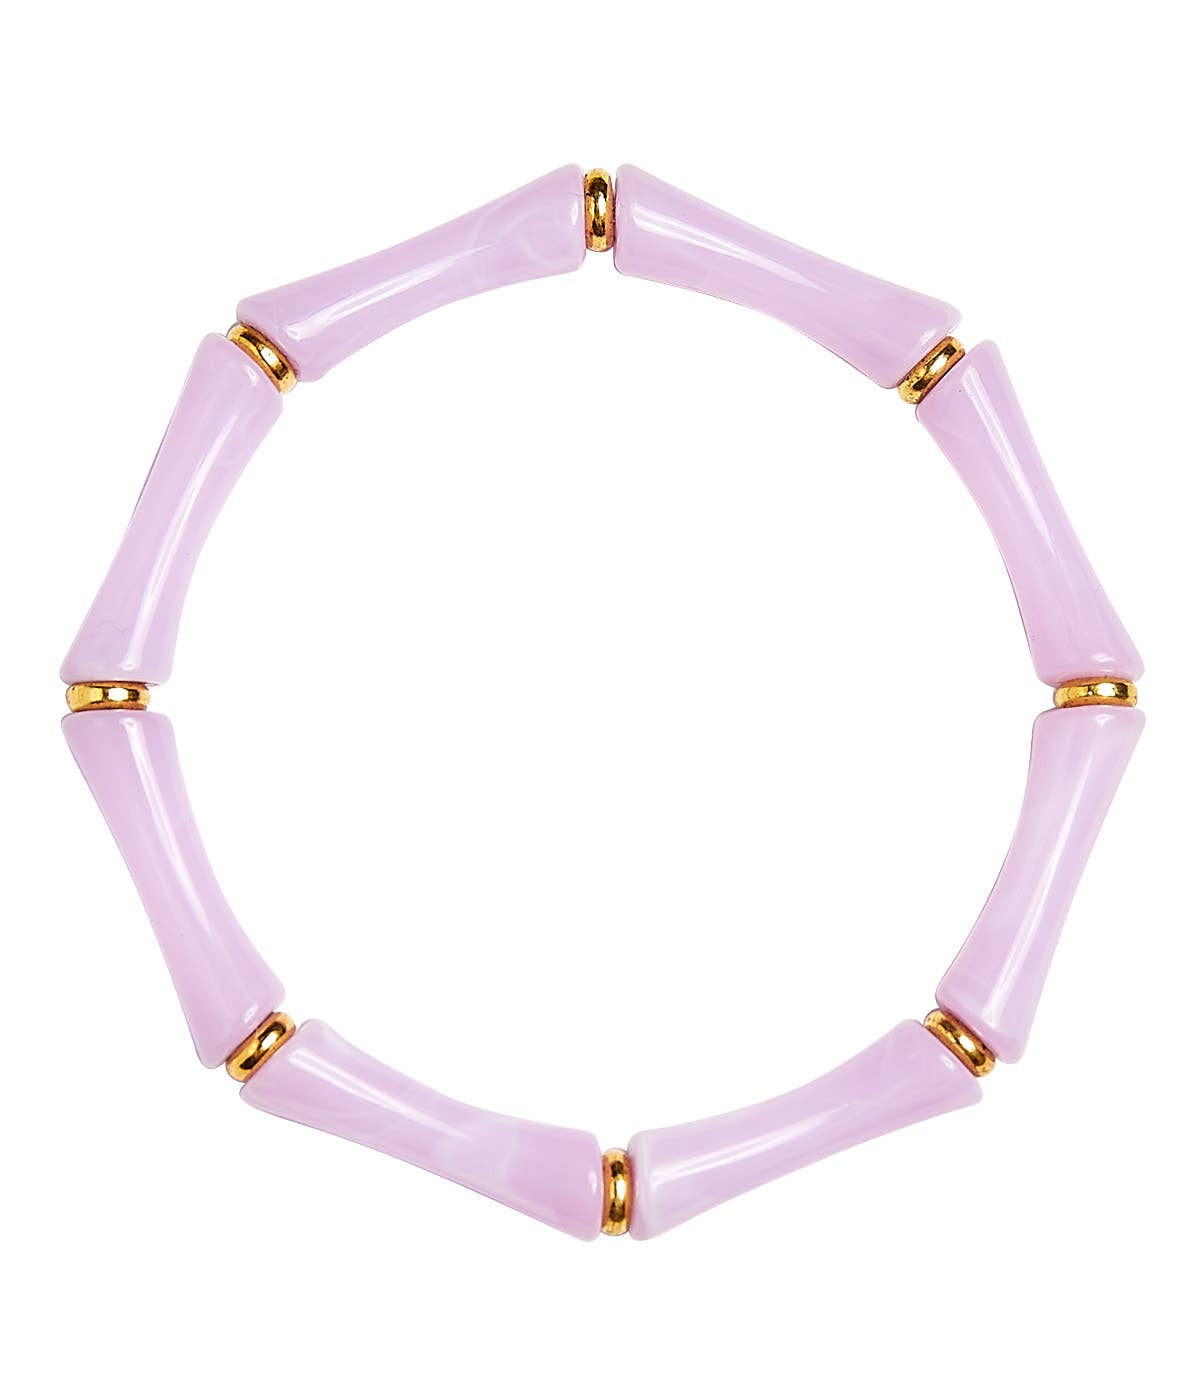 Lucy Bamboo Bracelet: Hot Pink